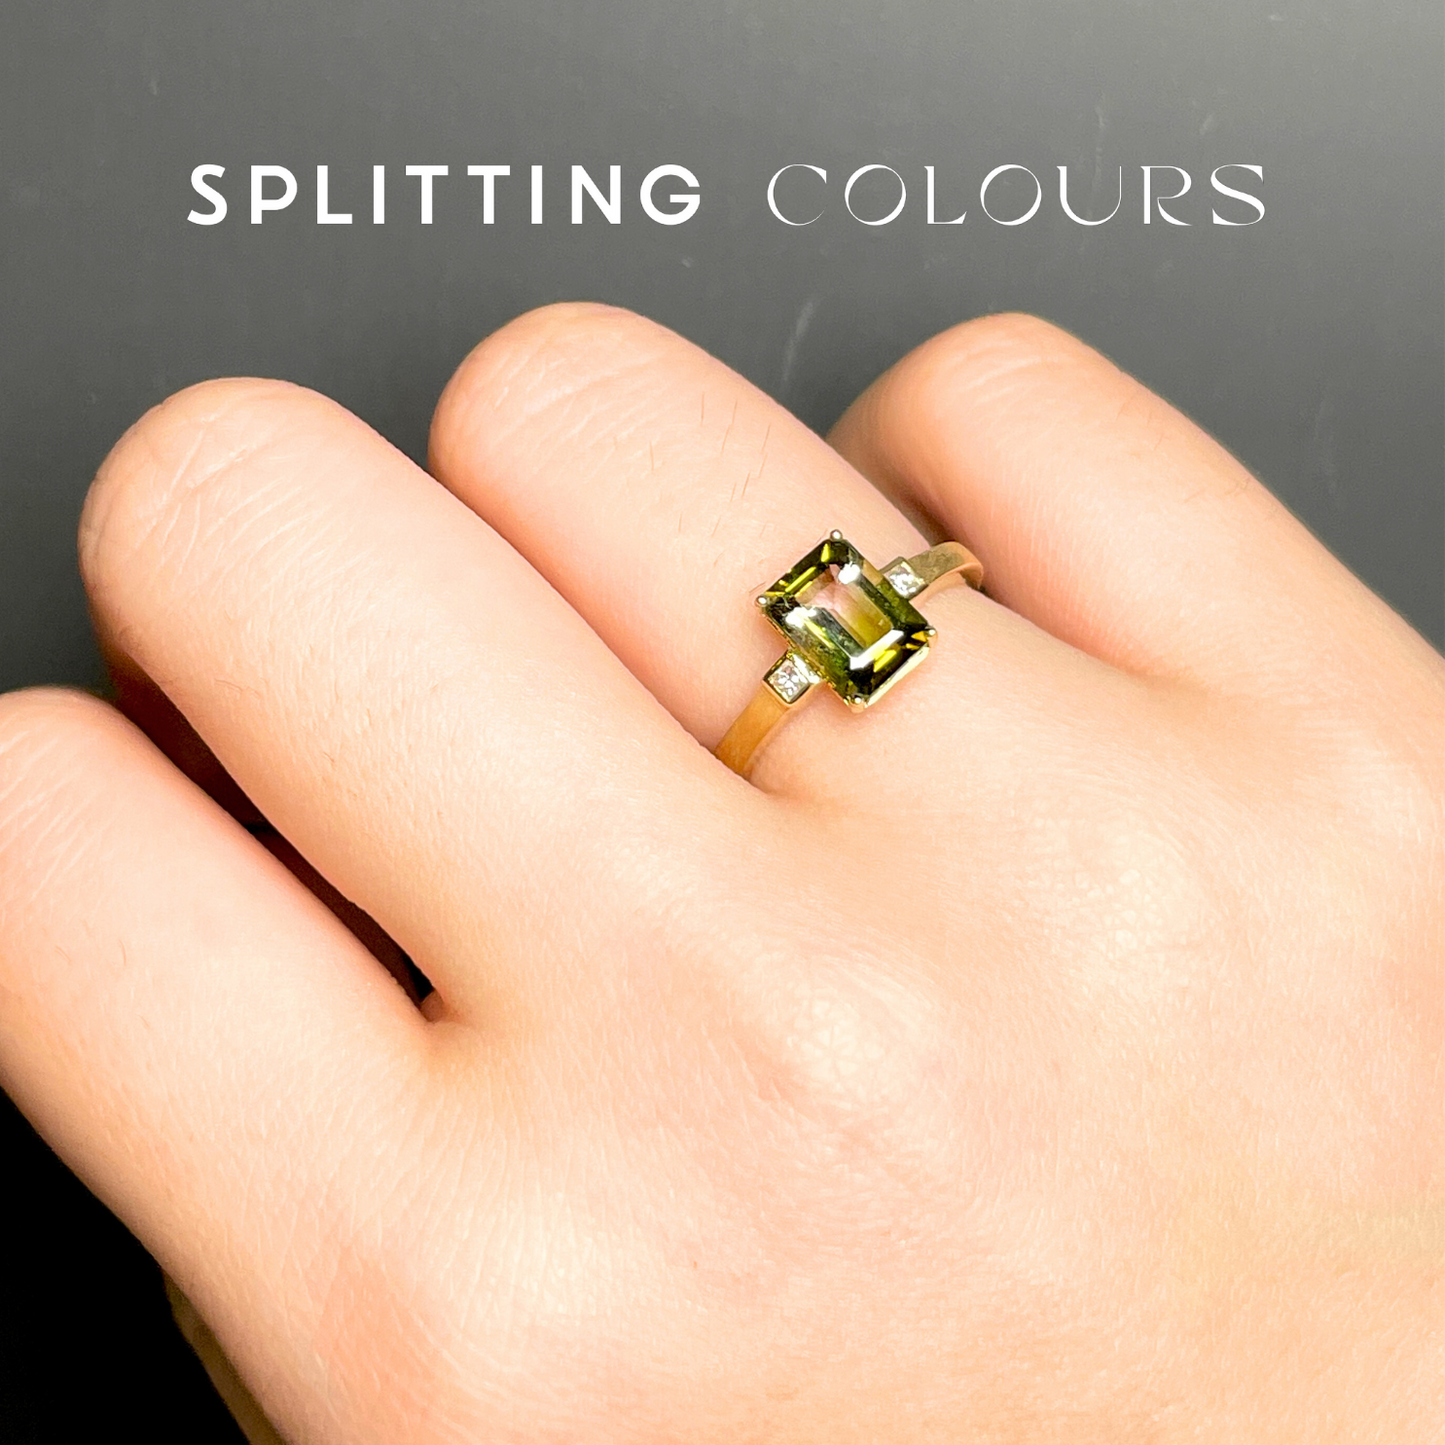 The Classic Ring - 1.71ct Grass Green Gradient Tourmaline with Diamonds